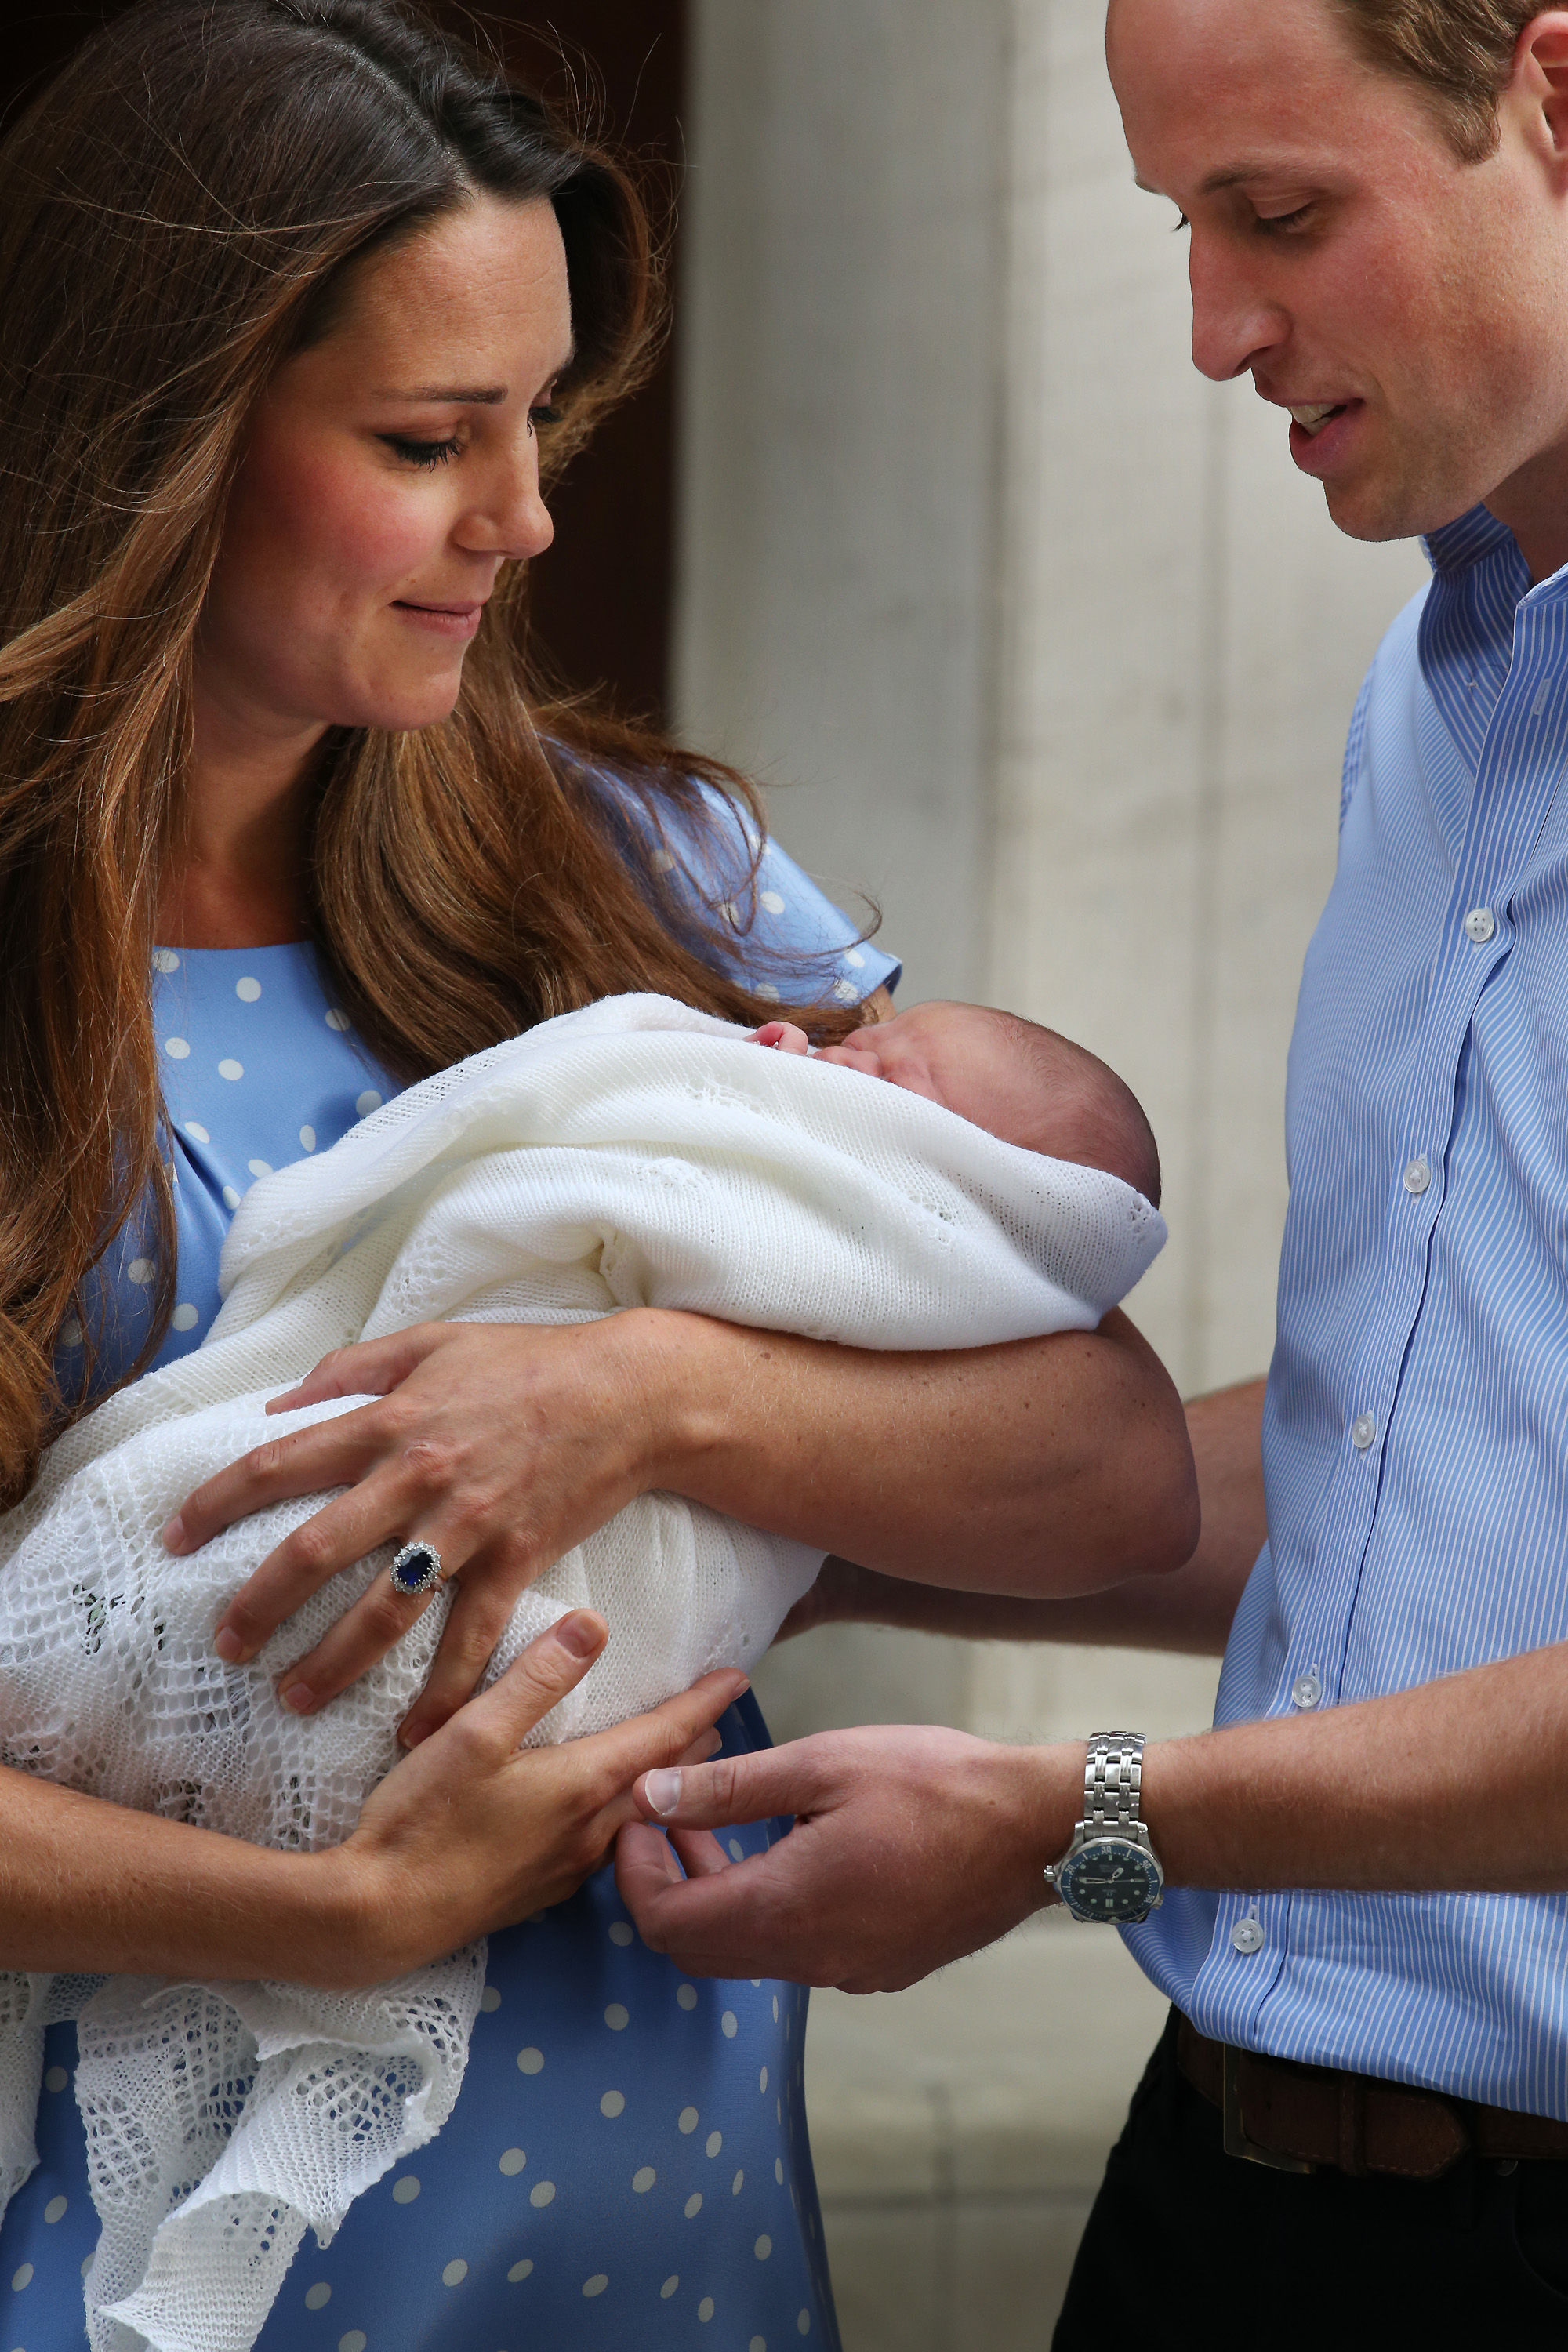 LONDON, ENGLAND - JULY 23: Prince William, Duke of Cambridge and Catherine, Duchess of Cambridge depart The Lindo Wing with their newborn son at St Mary's Hospital on July 23, 2013 in London, England. The Duchess of Cambridge yesterday gave birth to a boy at 16.24 BST and weighing 8lb 6oz, with Prince William at her side. The baby, as yet unnamed, is third in line to the throne and becomes the Prince of Cambridge. (Photo by Peter Macdiarmid/Getty Images)